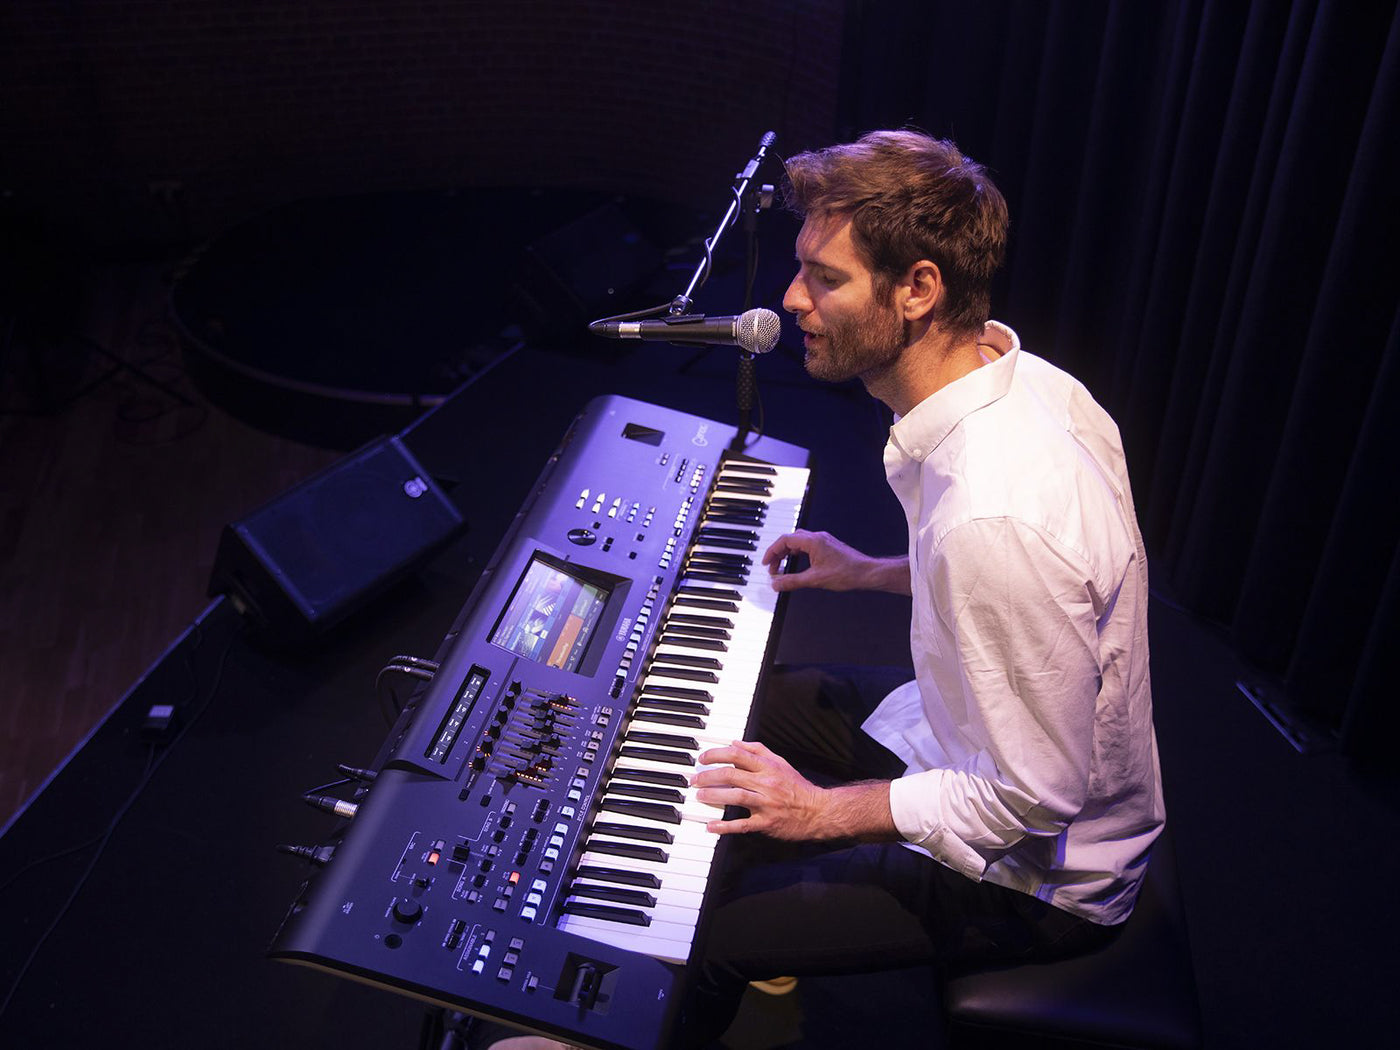 Male musician playing a digital stage piano during a live performance with microphone setup.